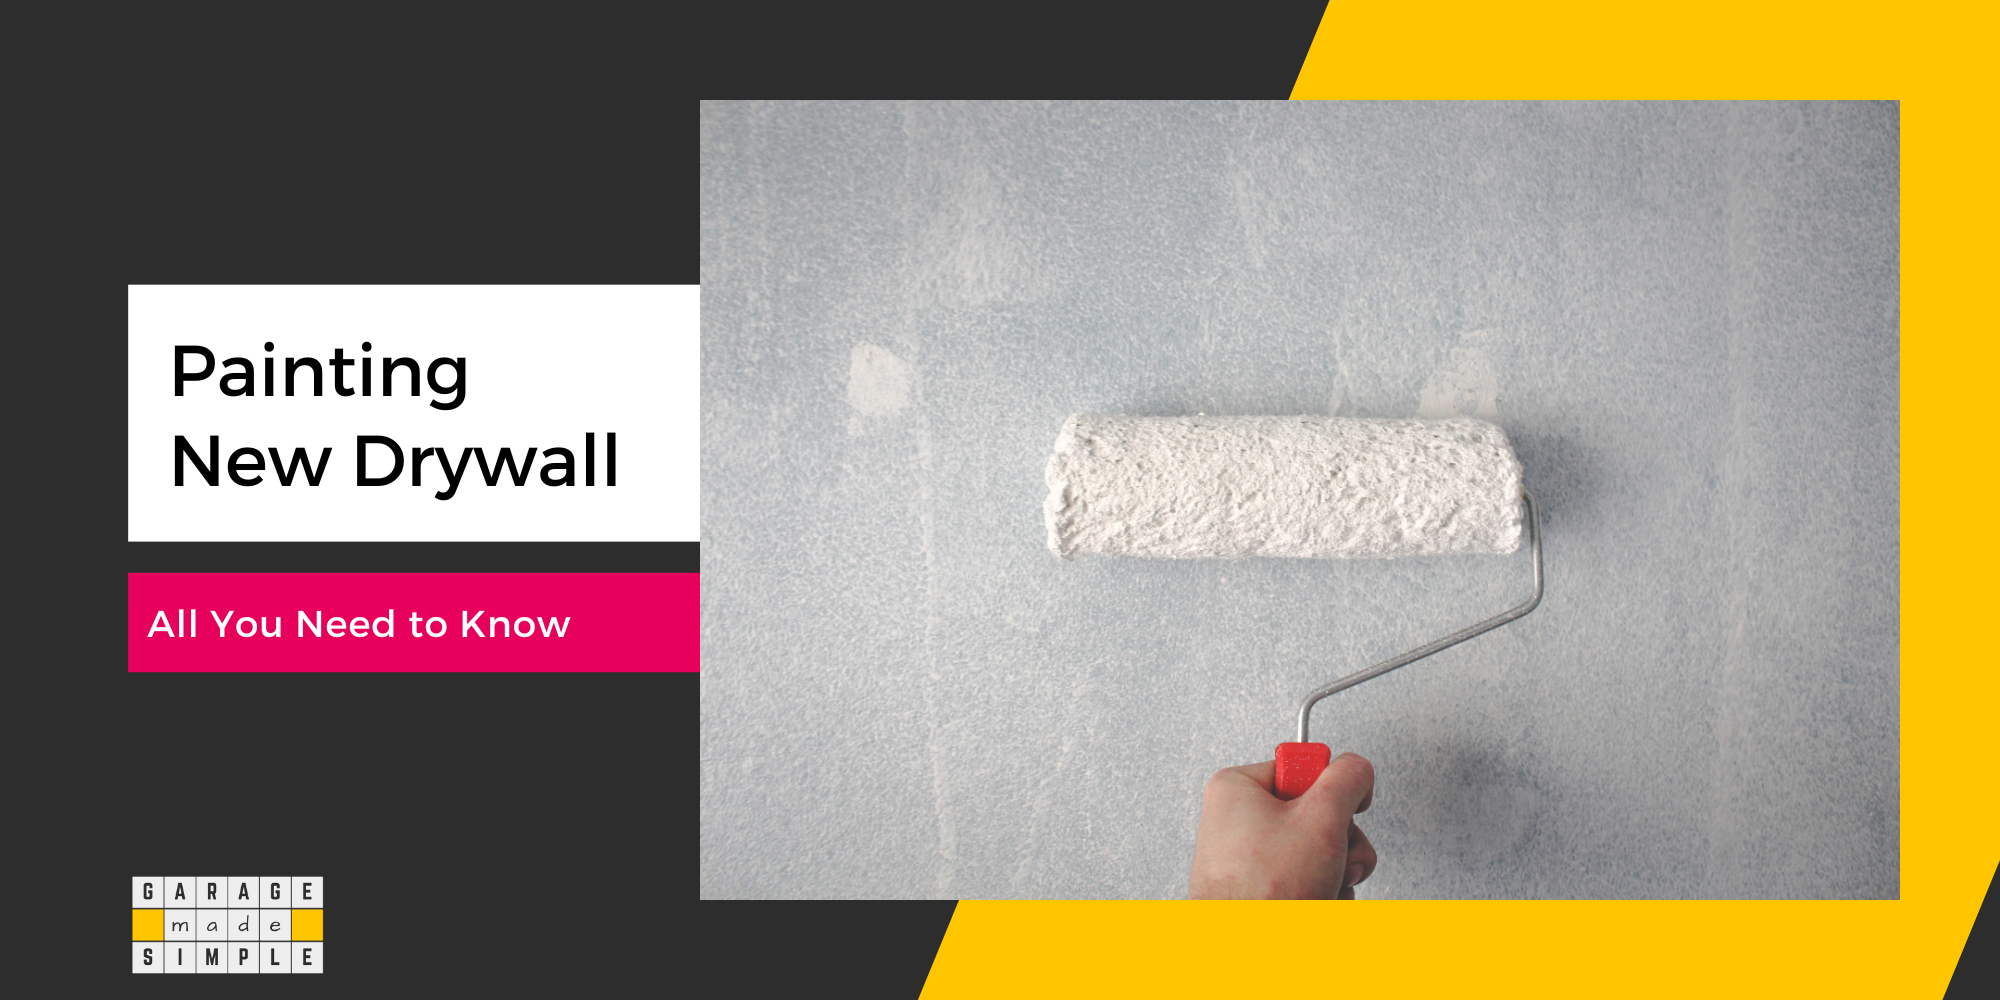 Painting New Drywall in Garage: Best Step-by-Step Guide